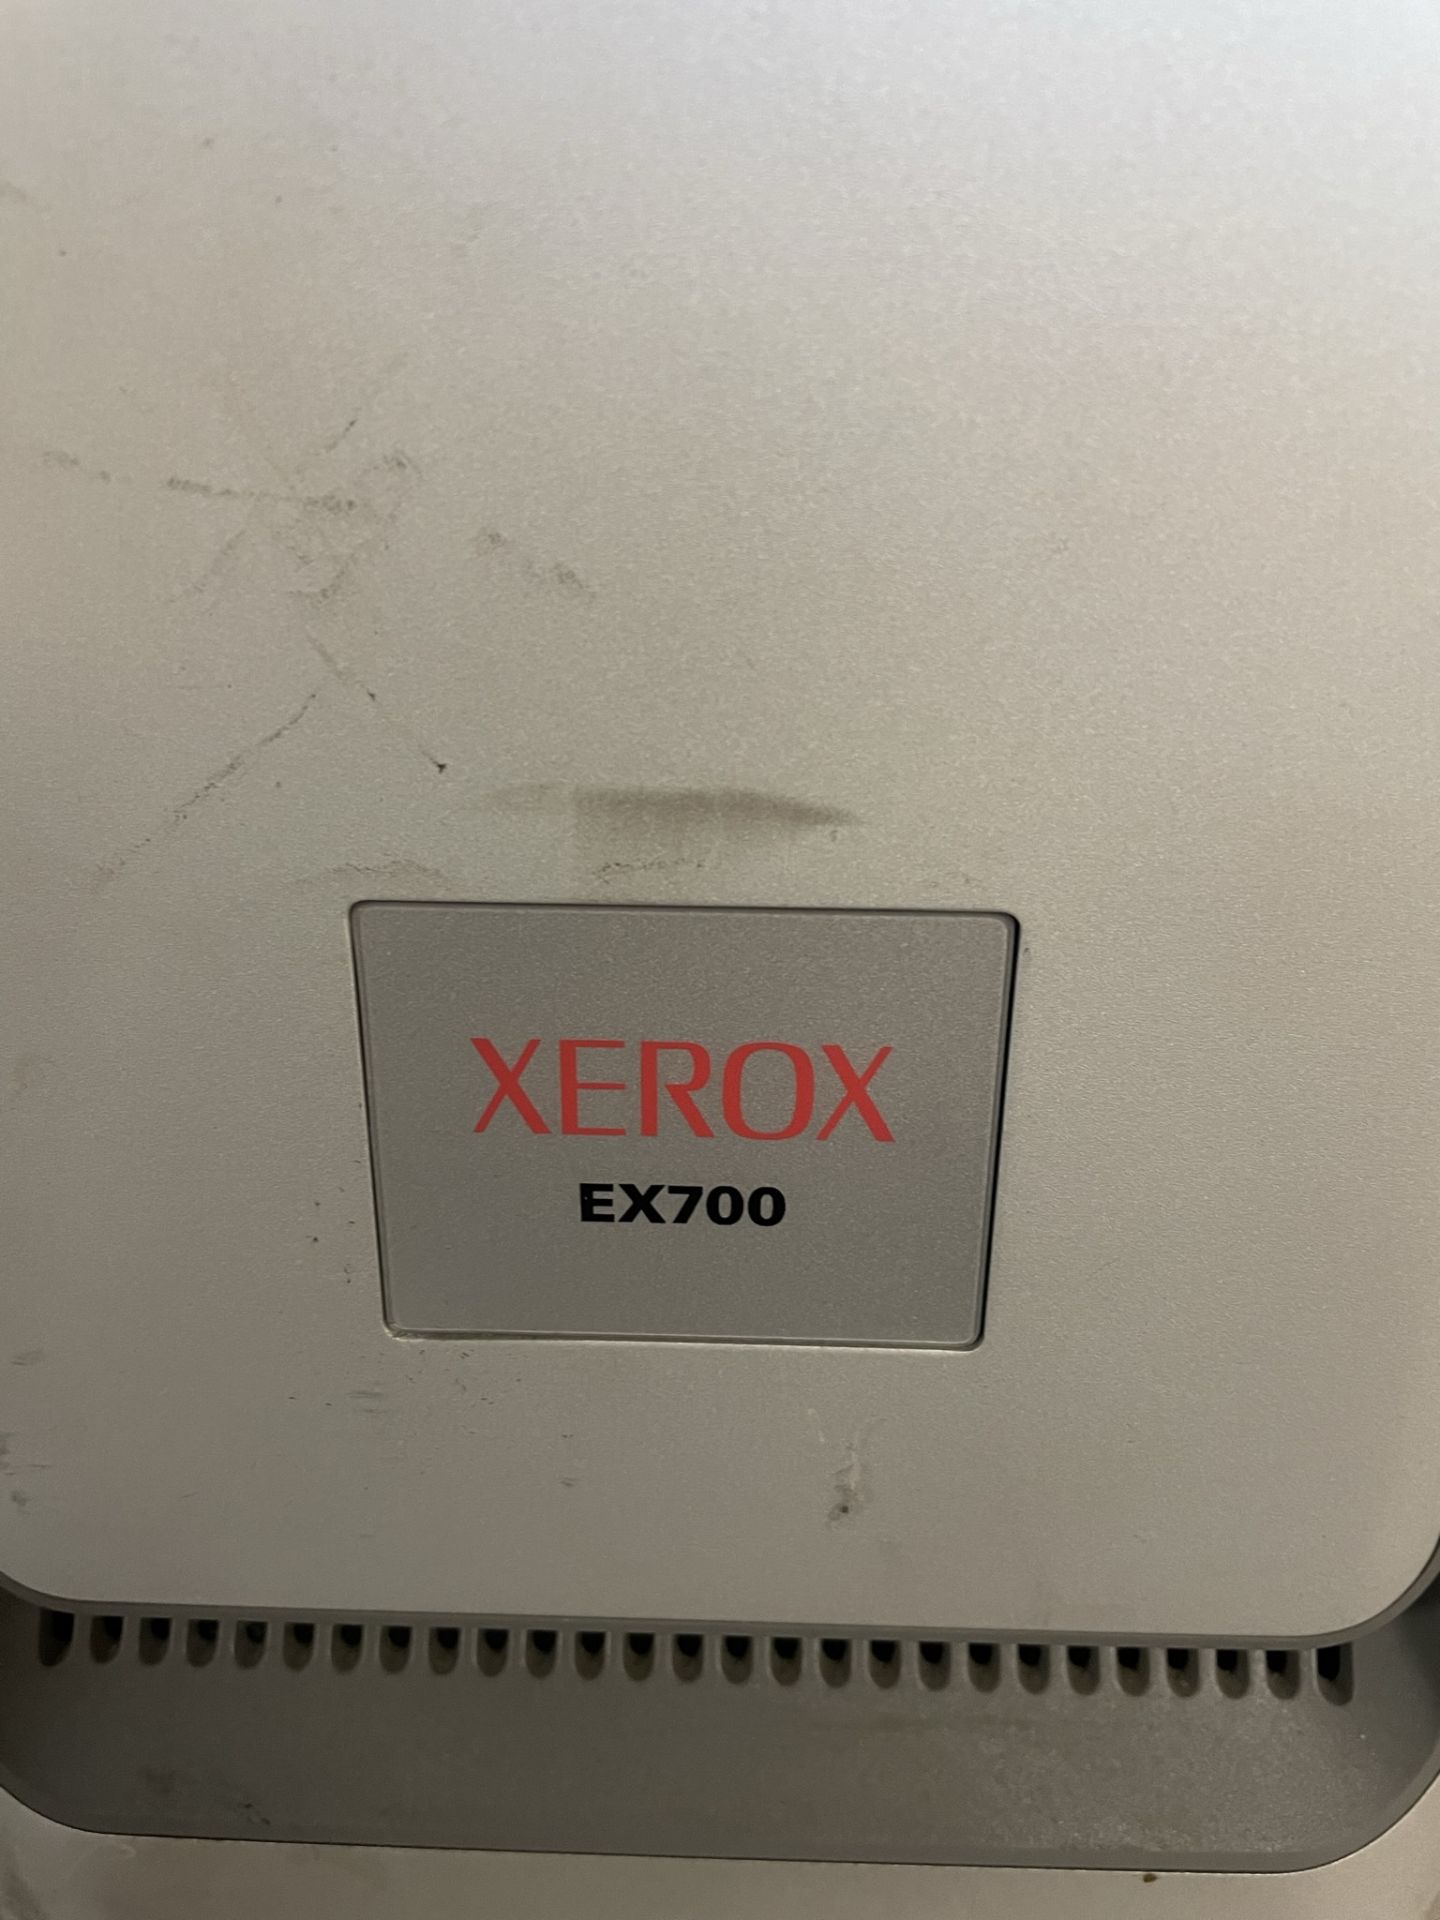 Xerox 700 Digital Colour Press w/ Suction Feeder, Paper Feeder & Fiery Controller - Image 8 of 9